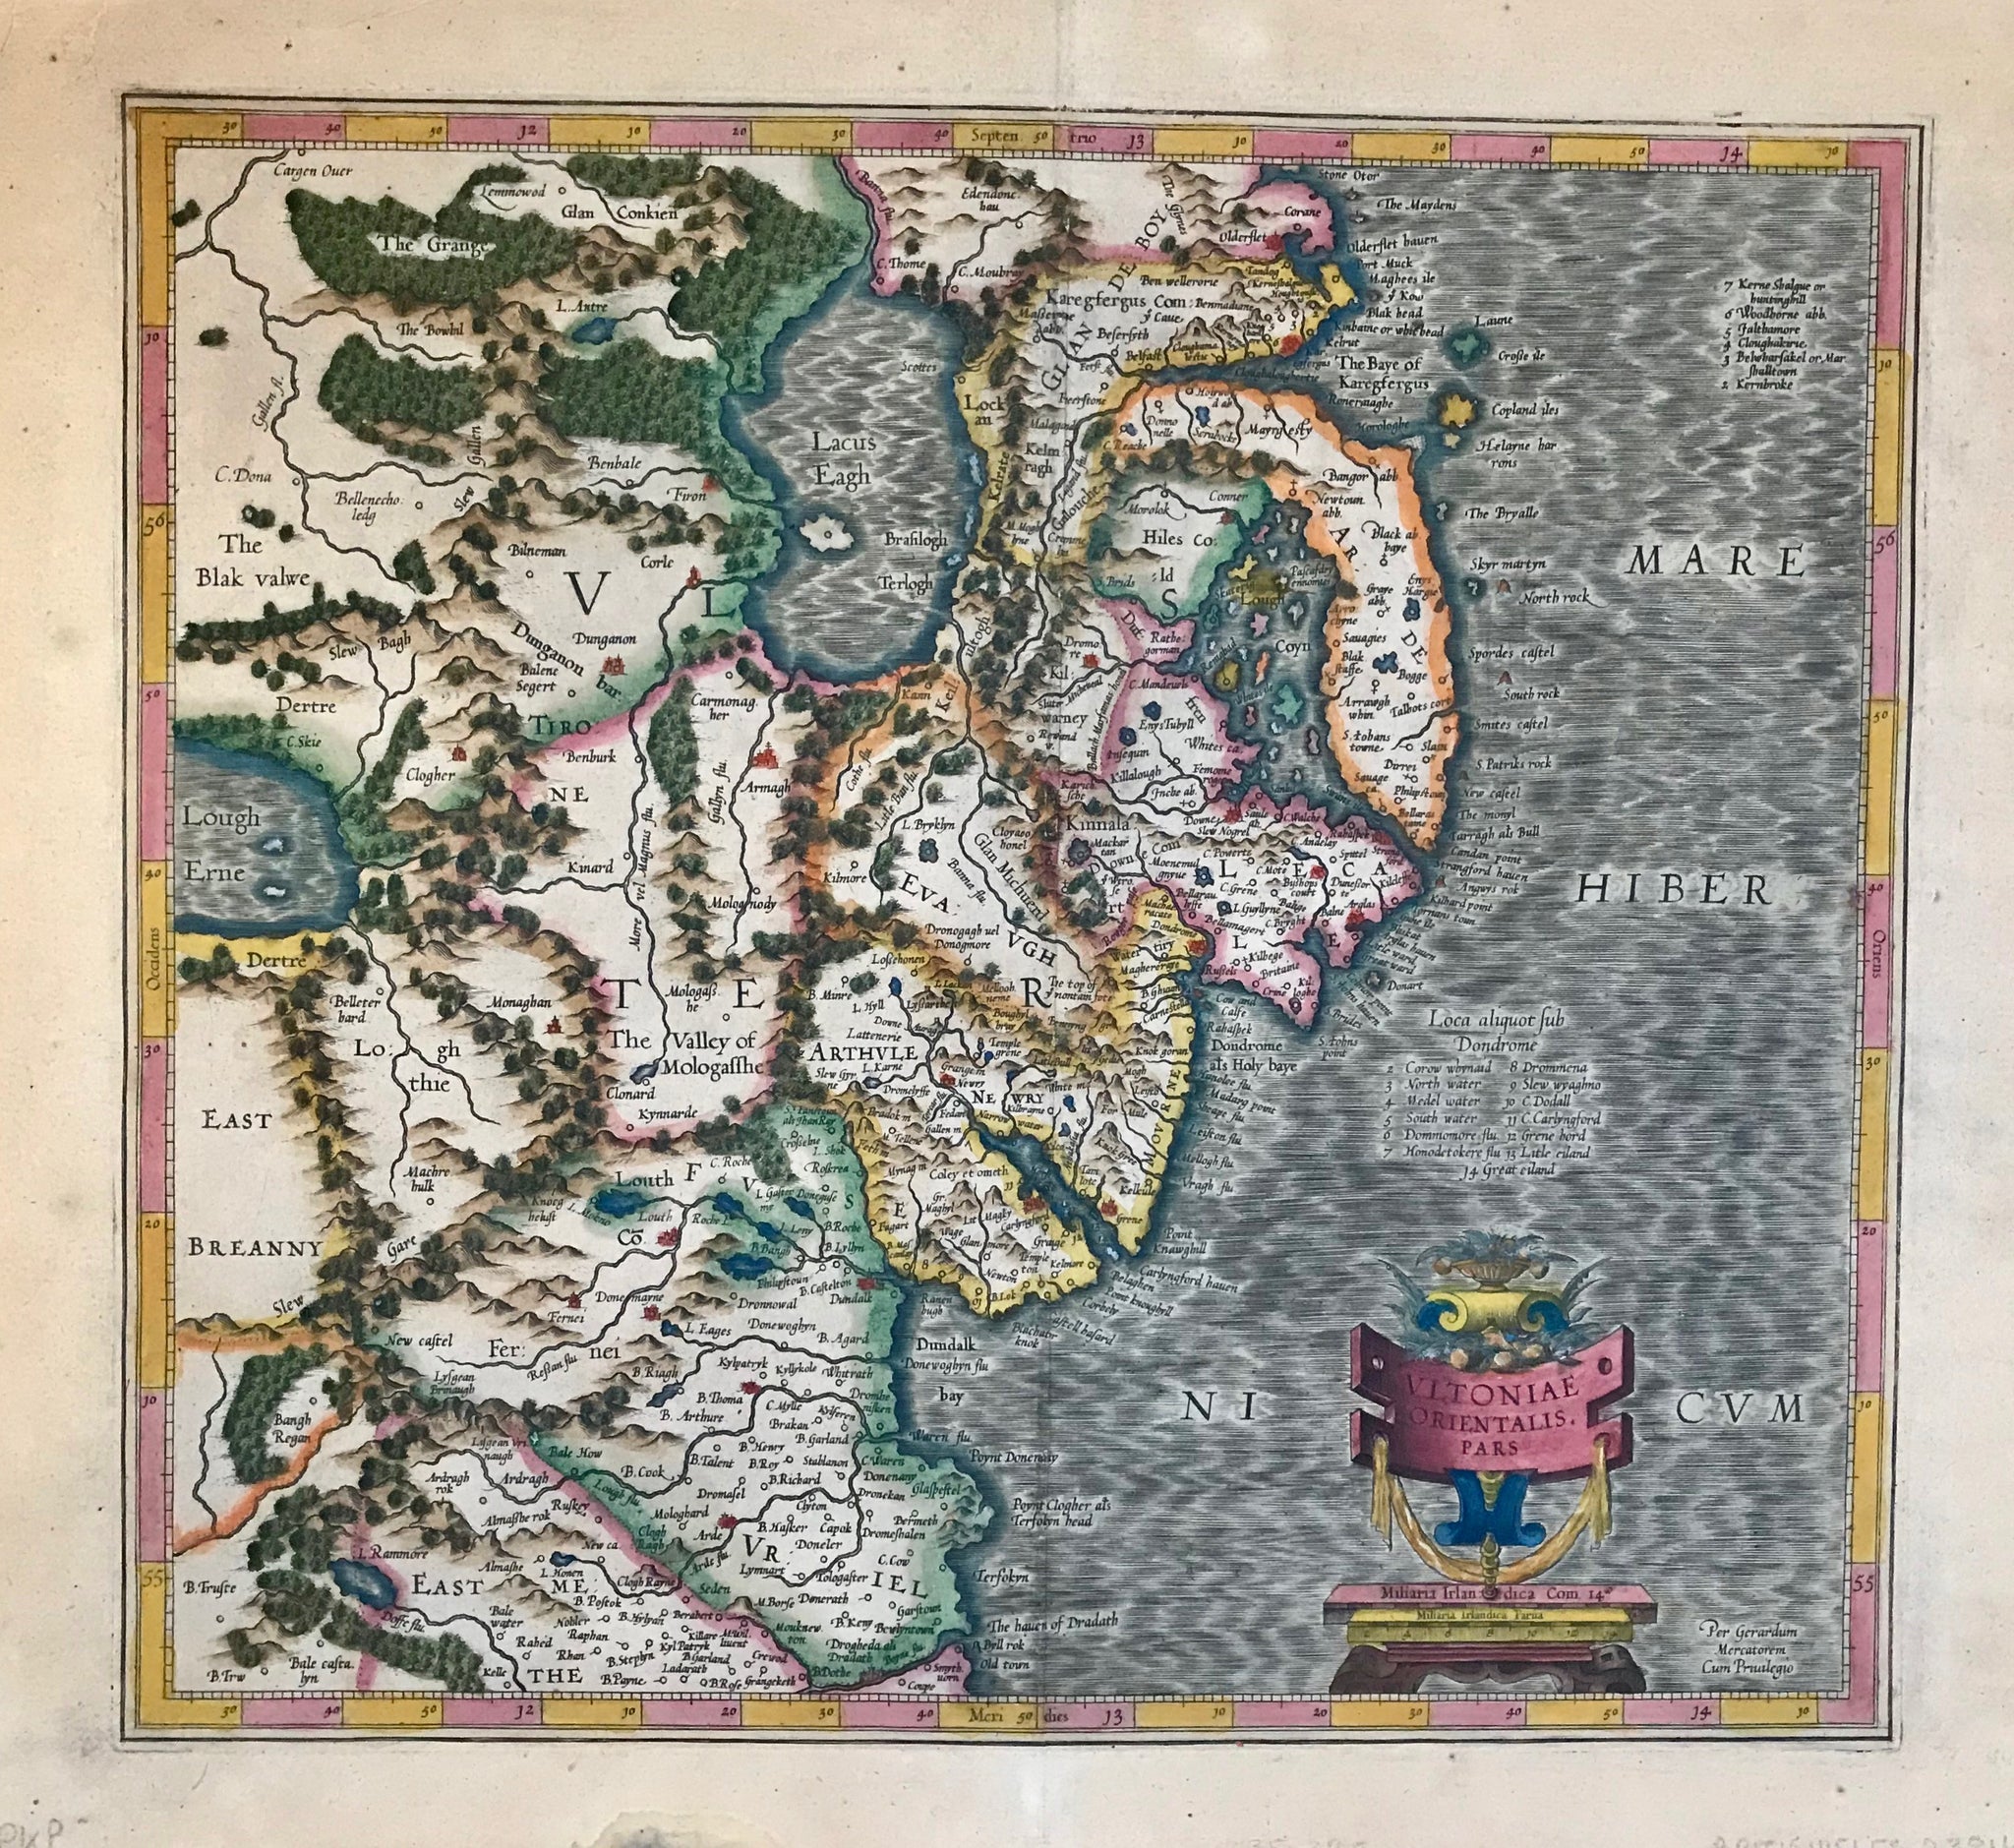 Ireland, "Ultoniae Orientalis Pars"  Map shows Eastern part of Ulster (North Ireland)  Outstandingly originally hand-colored copper etching by Gerard Mercator (1512-1594)  Published posthumously by Mercator's son Rumold in Duisburg, 1595